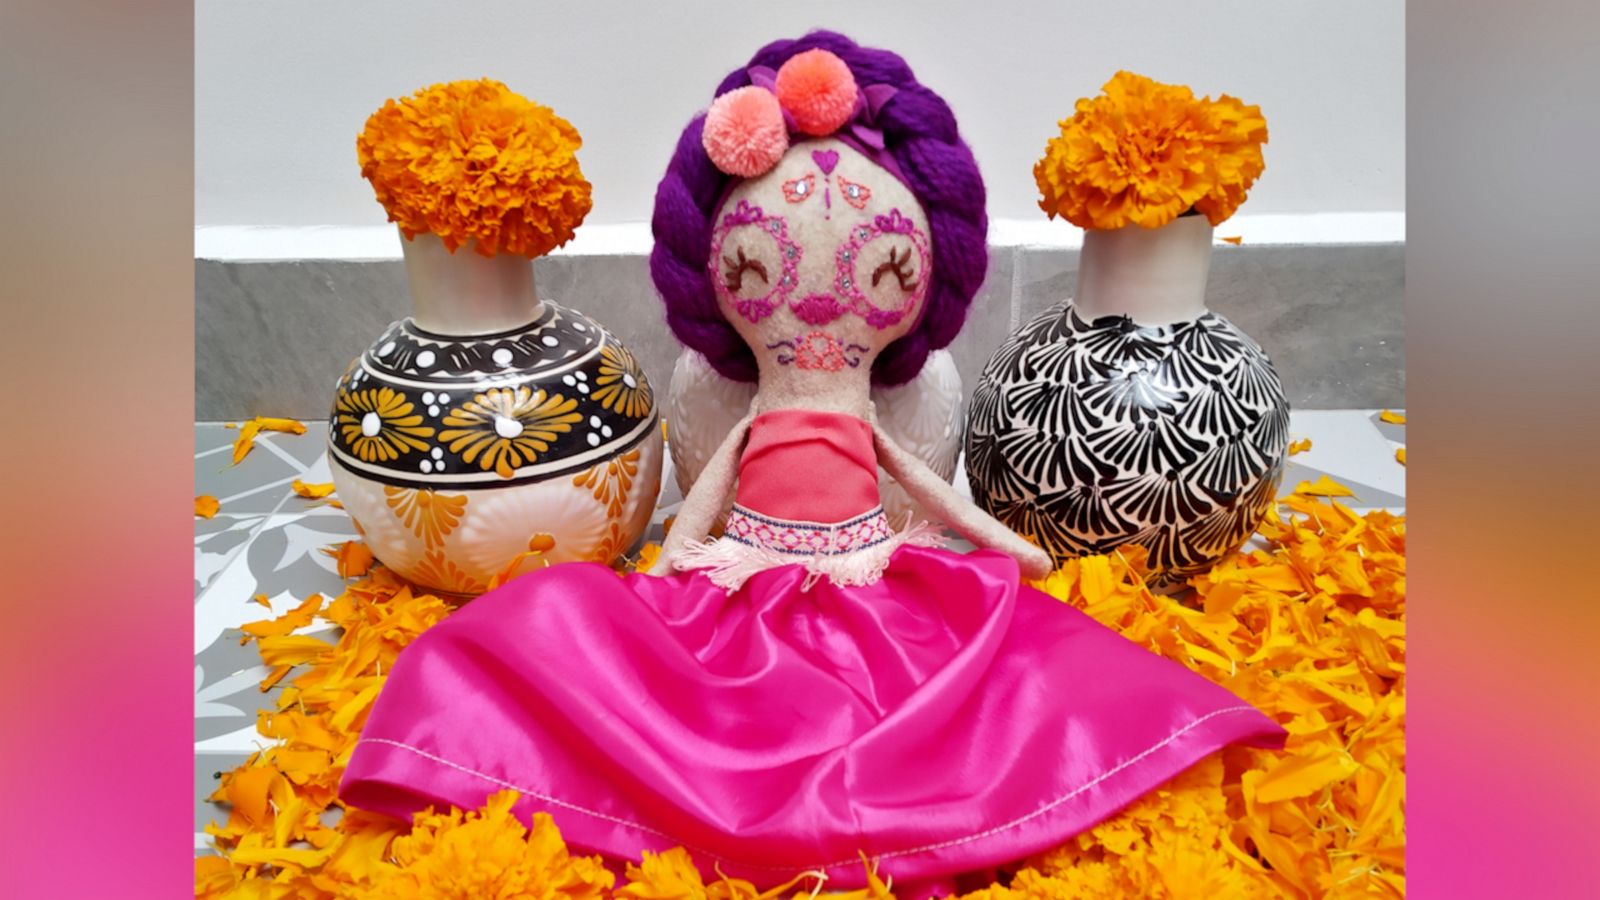 VIDEO: Dollmaker creates handmade dolls inspired by Latin cultures